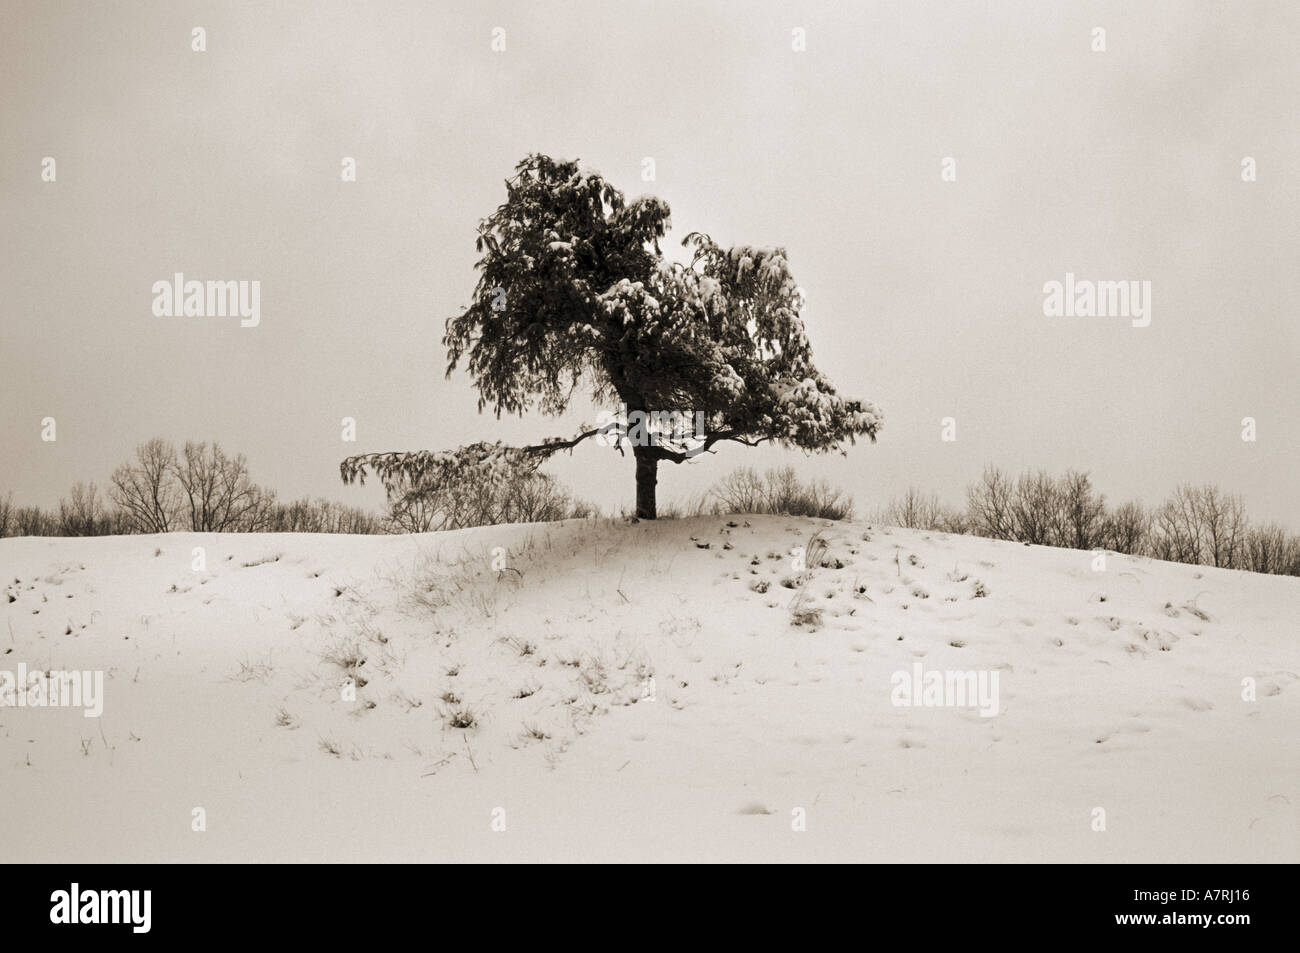 Simple tree in a snowy landscape Stock Photo